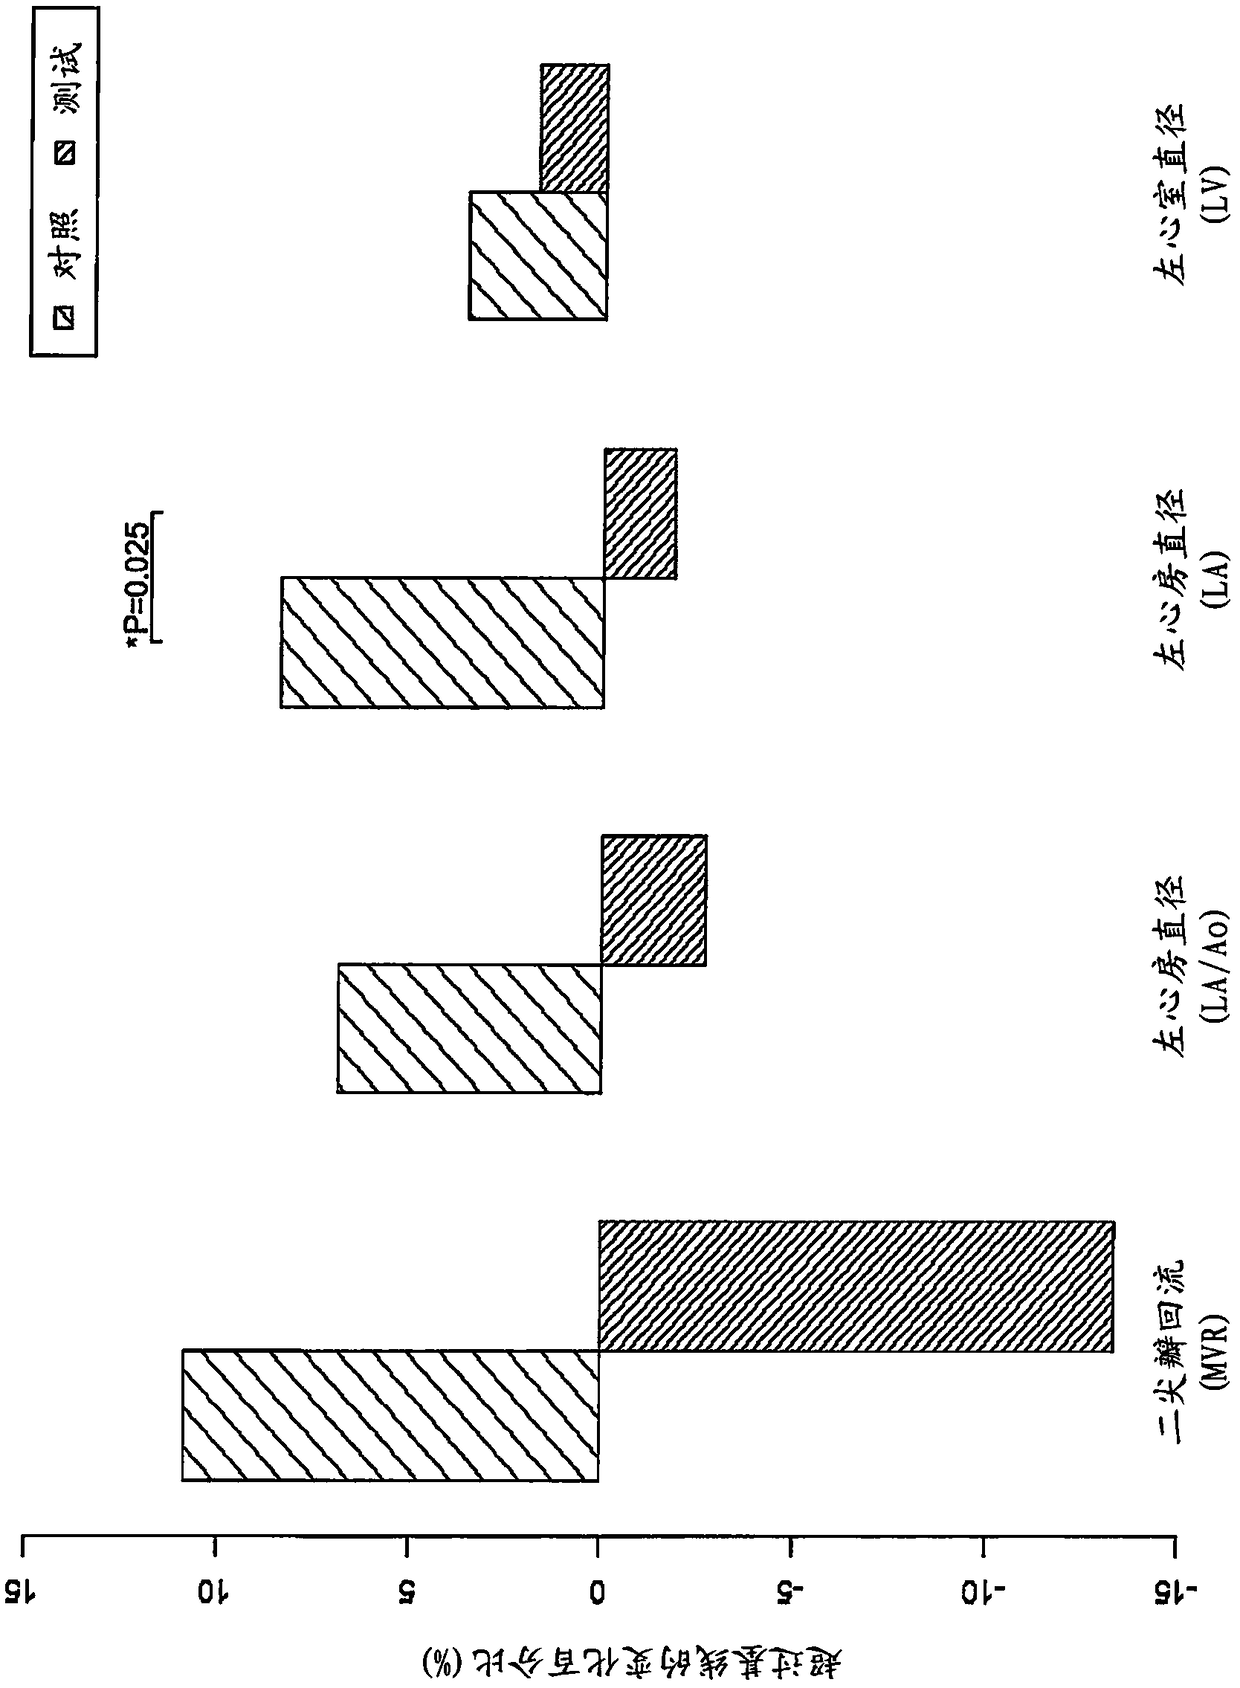 Nutritional compositions for cardciac protection in companion animals